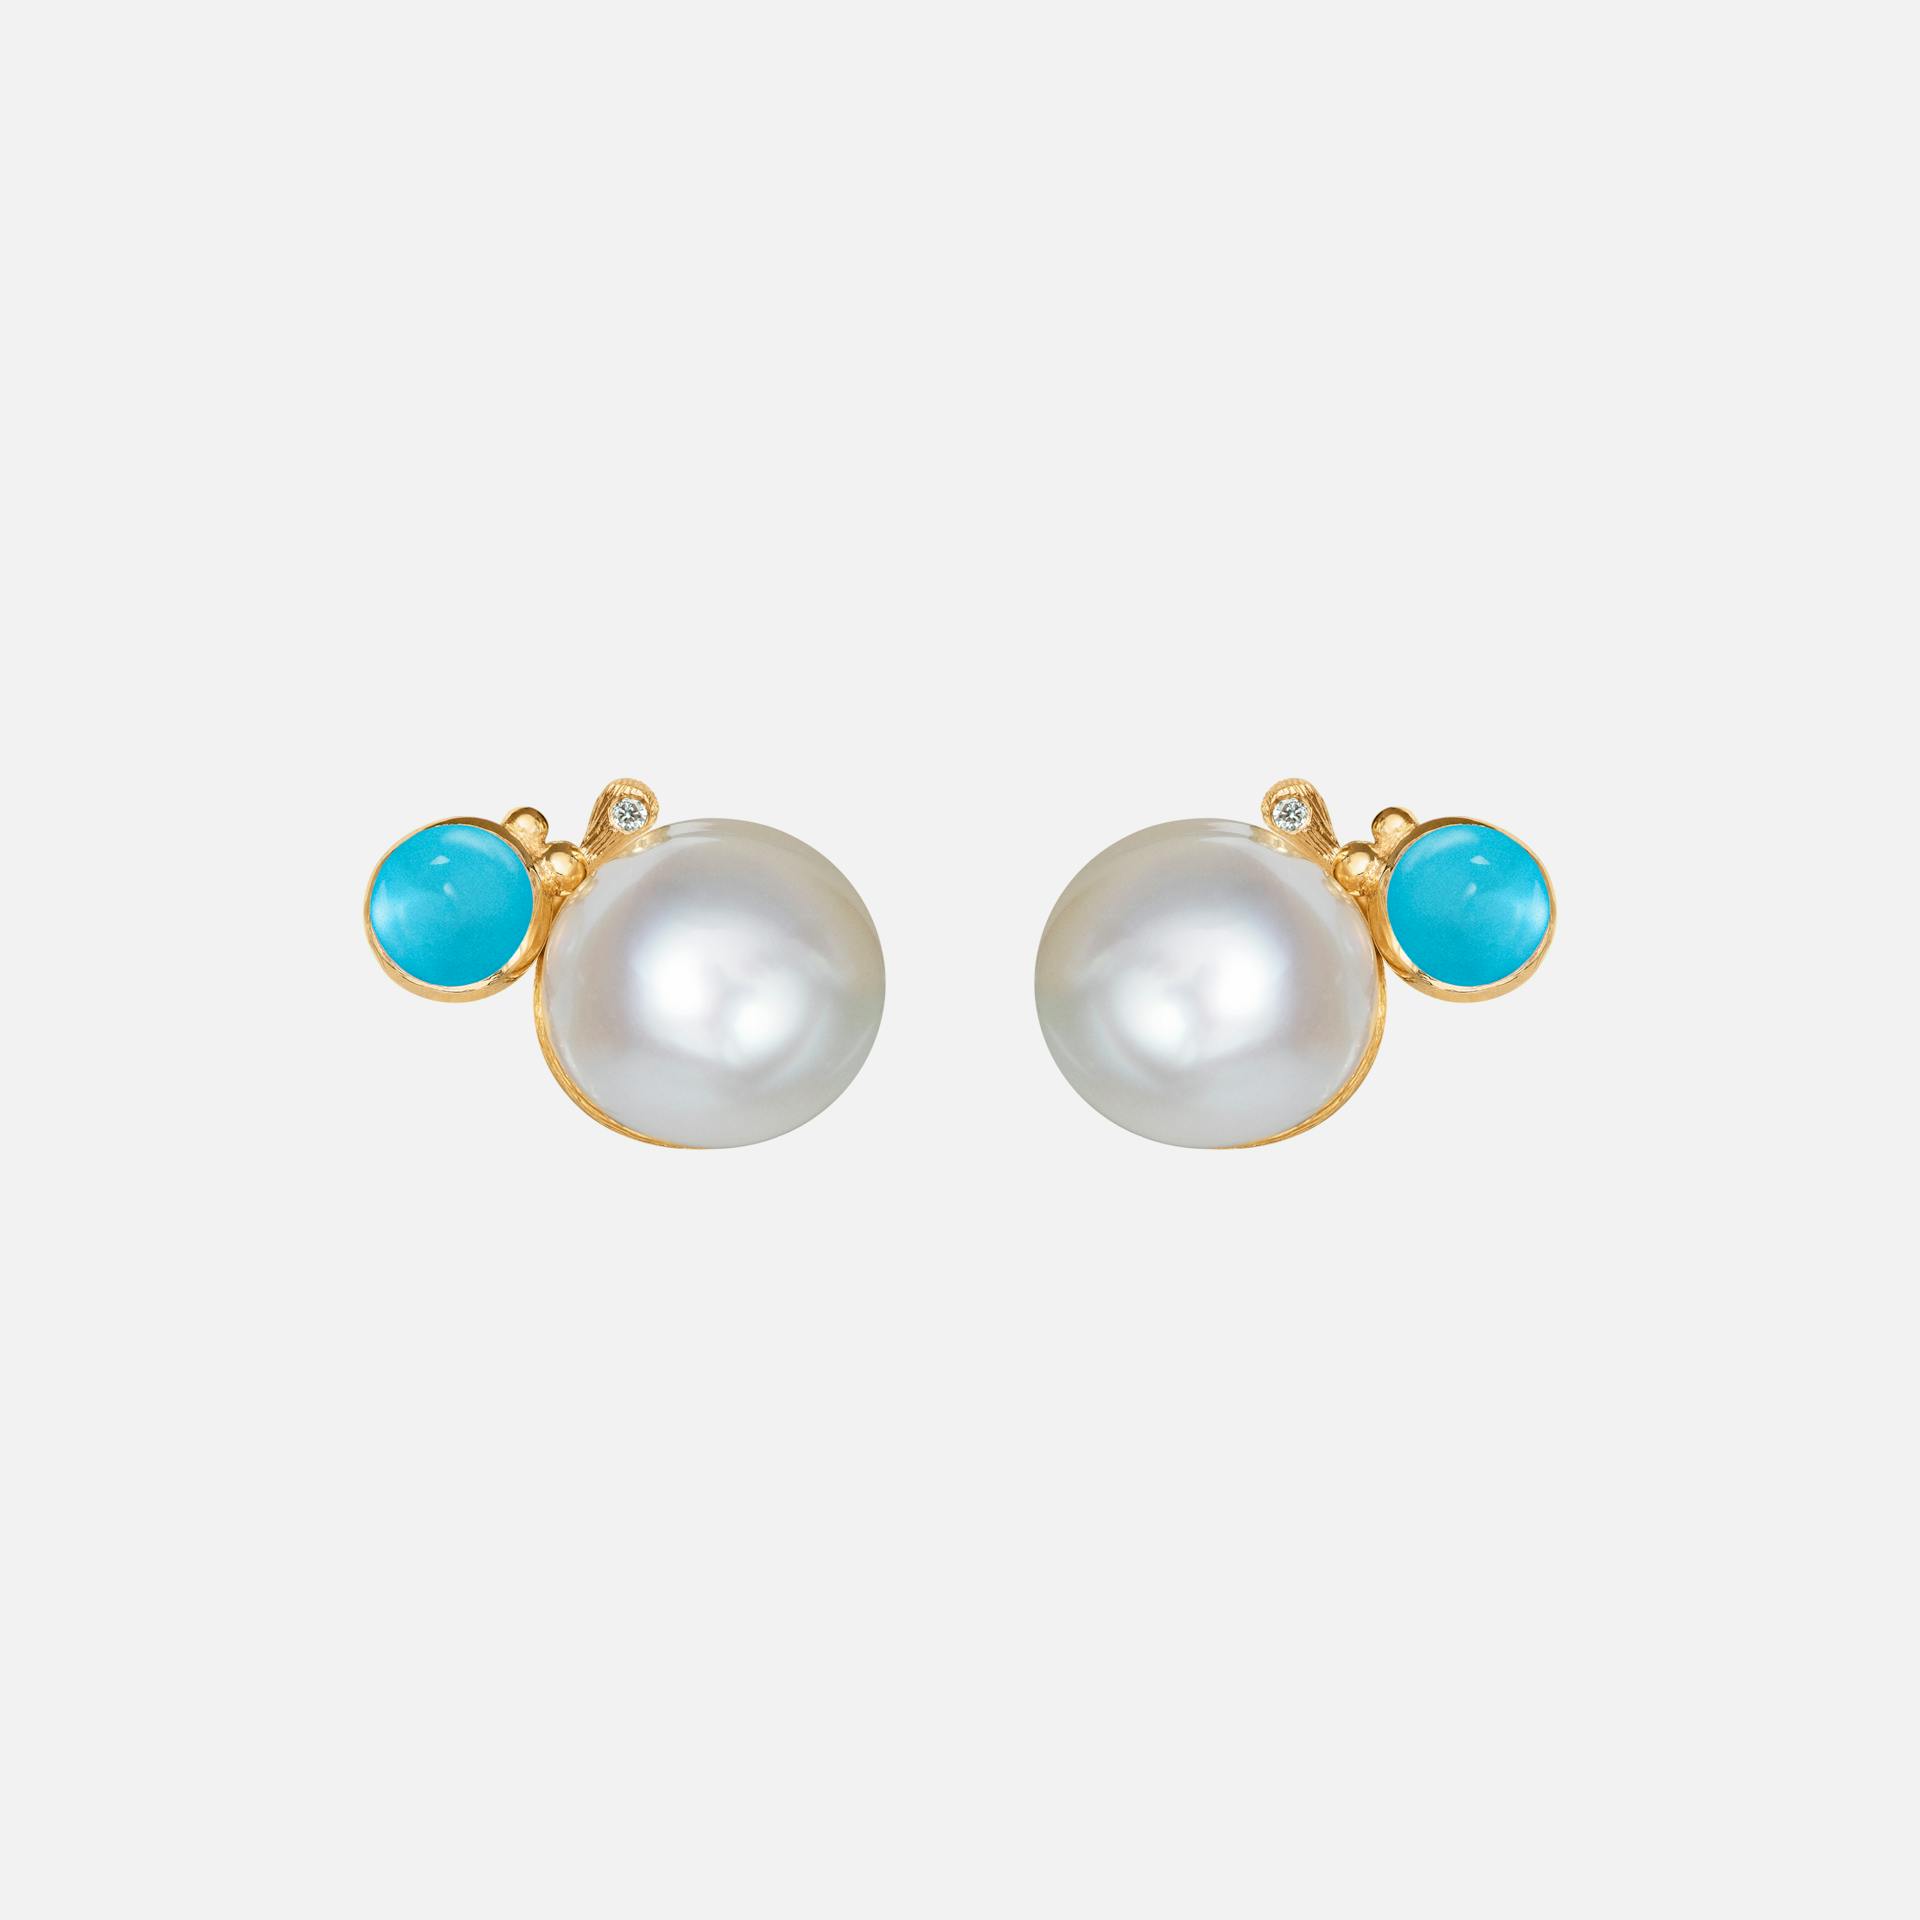 BoHo Pearl Stud Earrings in Gold with  Turquoise and Diamonds  |  Ole Lynggaard Copenhagen